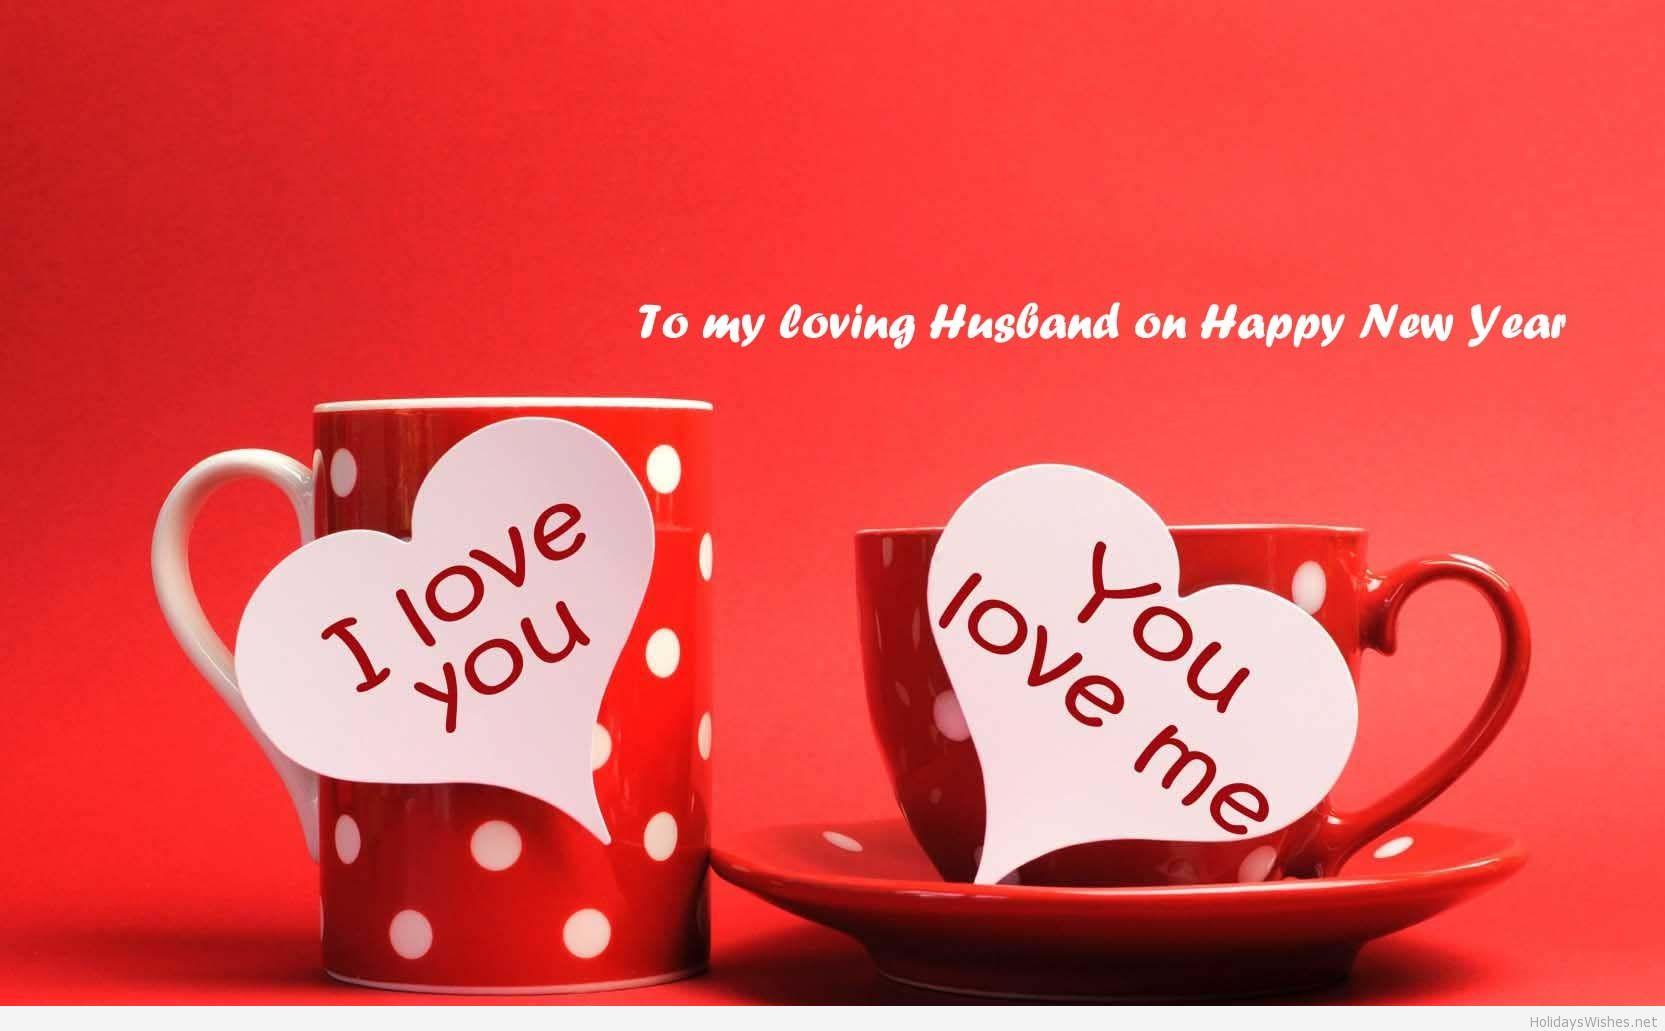 Happy new year love wallpaper 2015 HD for husbands